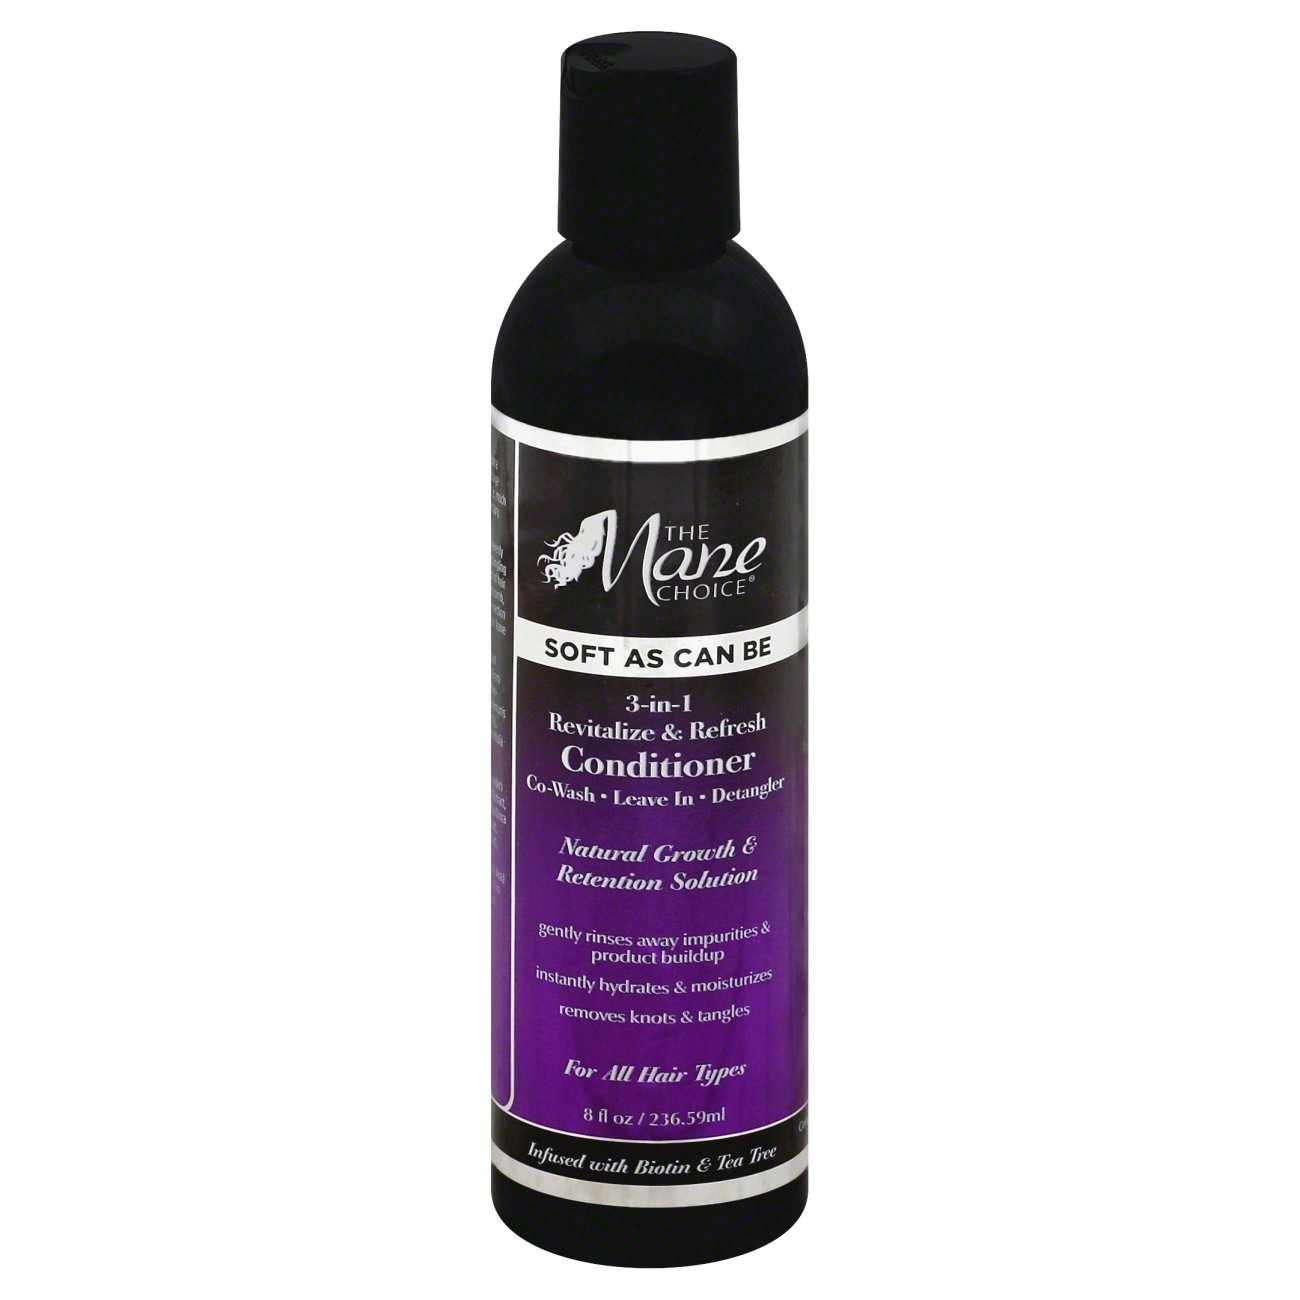 The Mane Choice Soft As Can Be Revitalize & Refresh 3-in-1 Conditioner ...